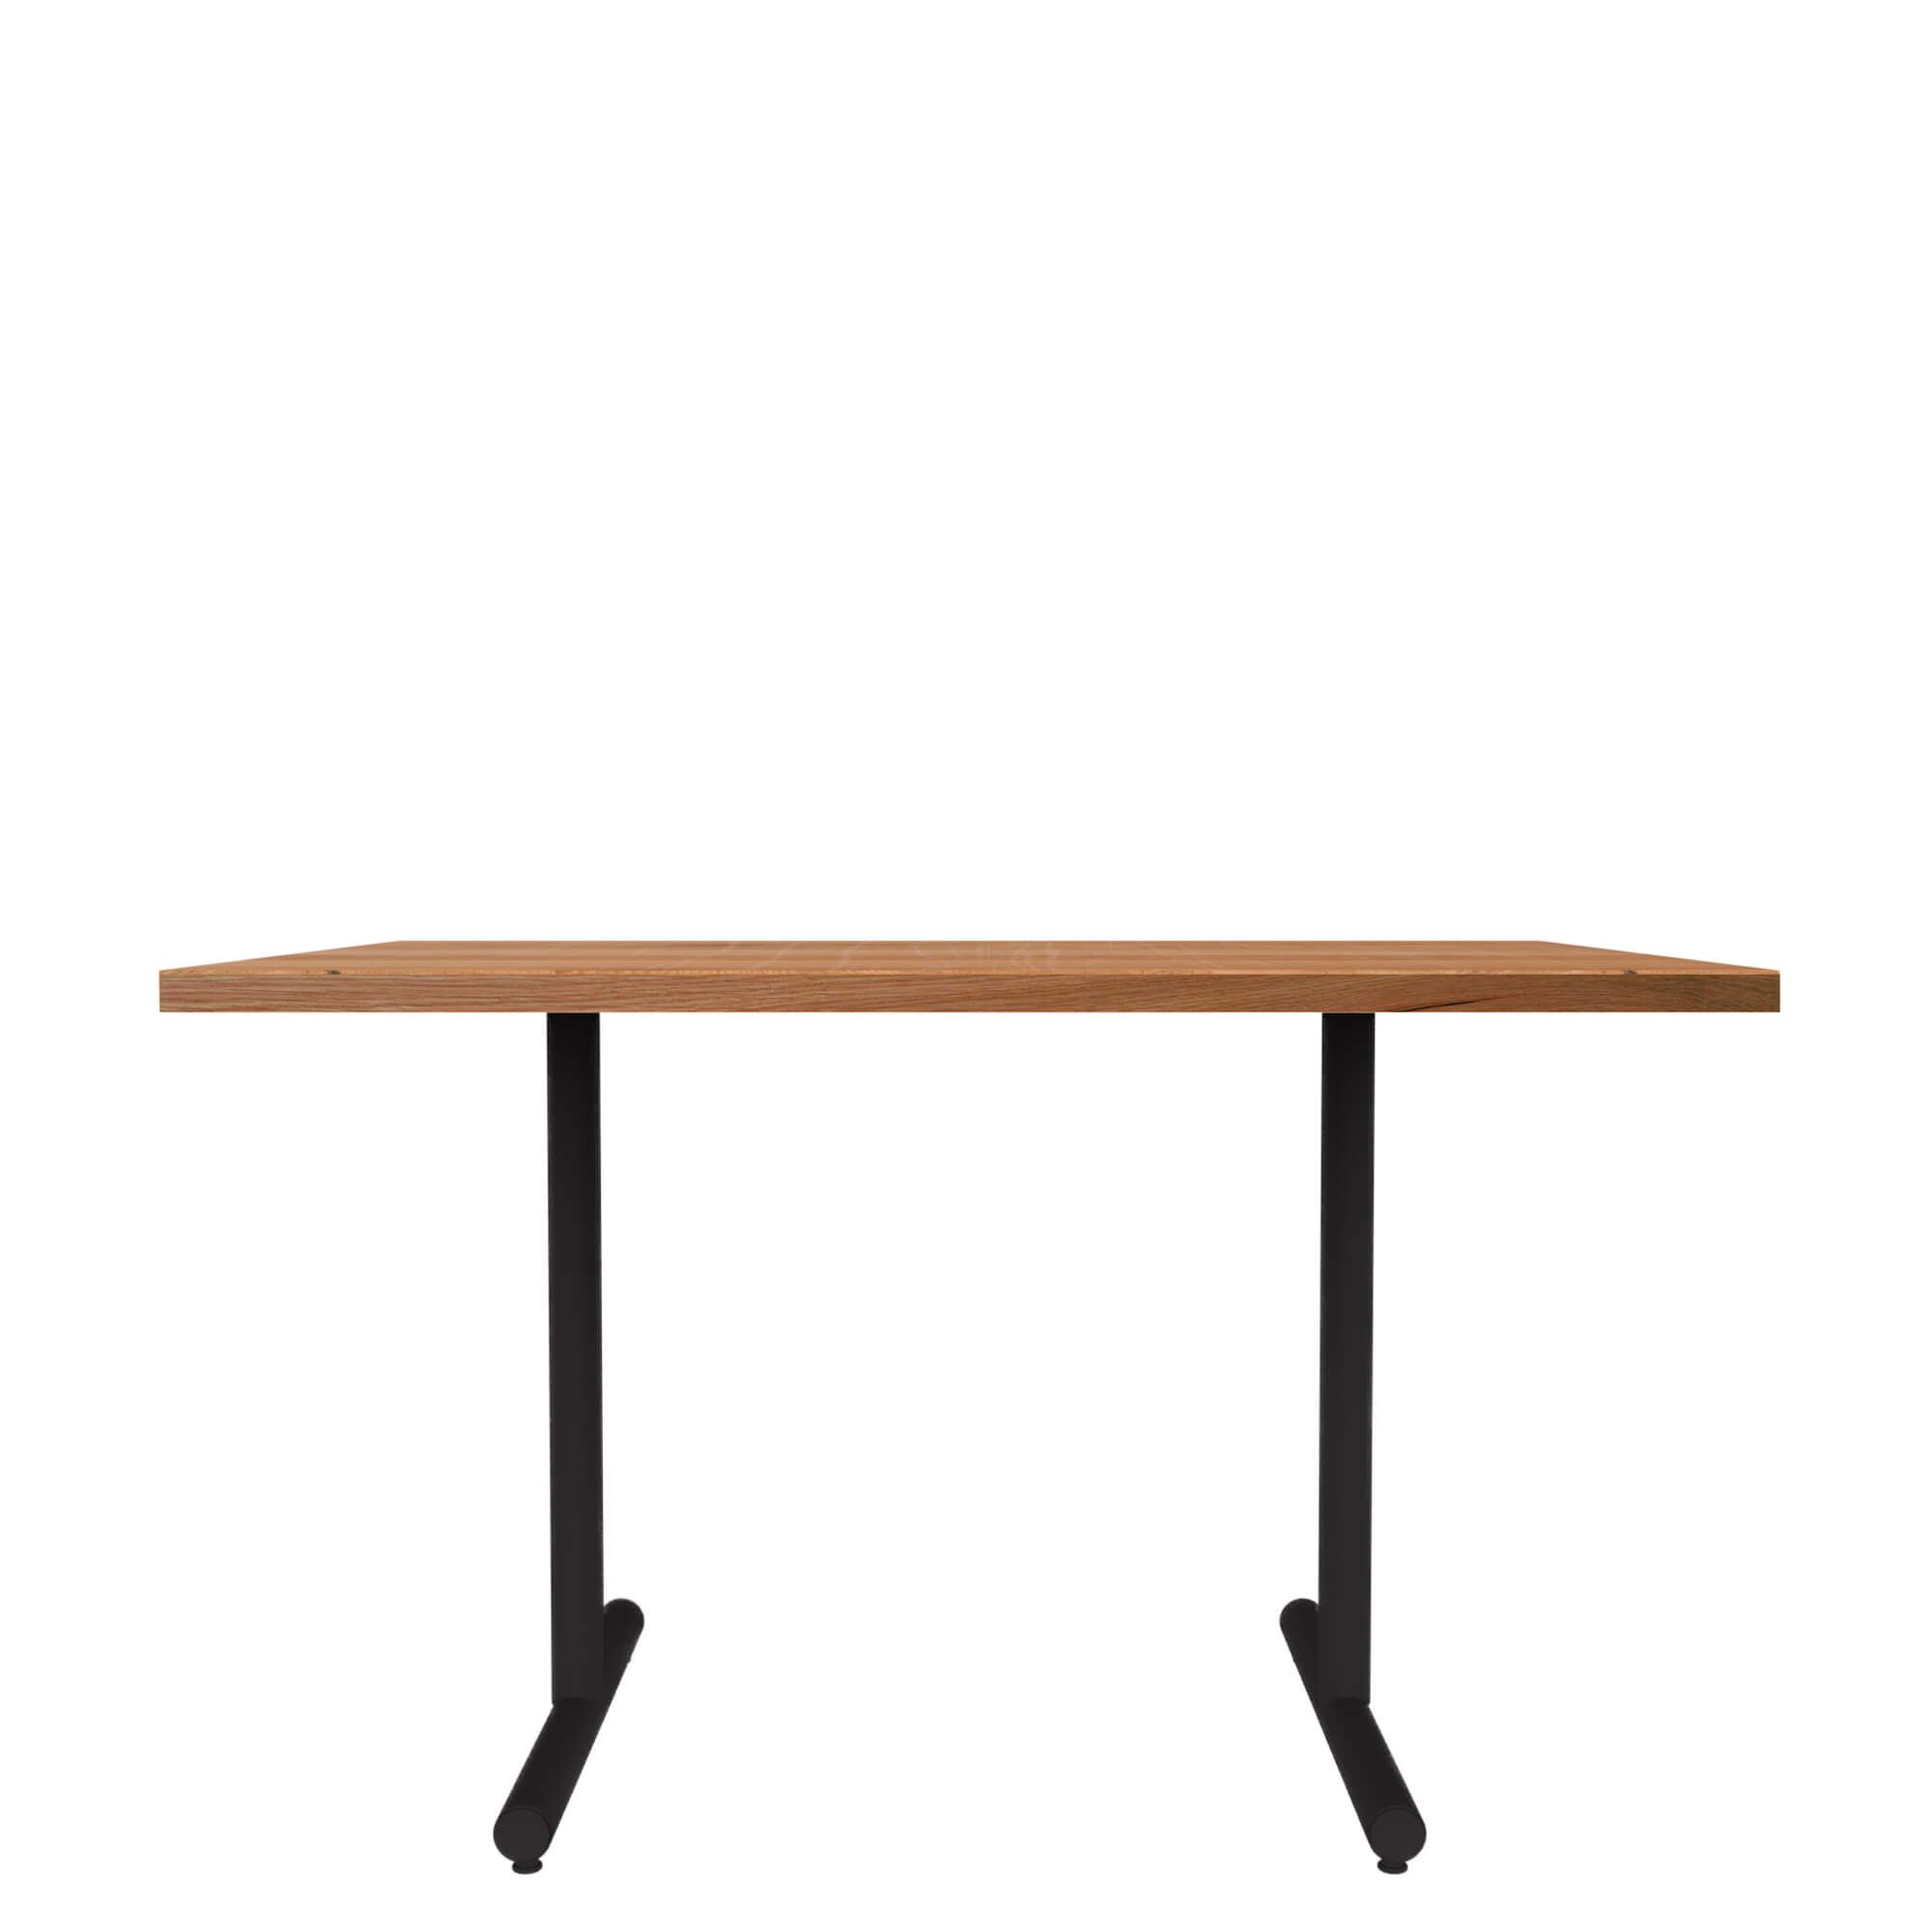 Industrial Welded T Table Base: 22" Wide | Crow Works In White T Base Seminar Coffee Tables (View 8 of 15)